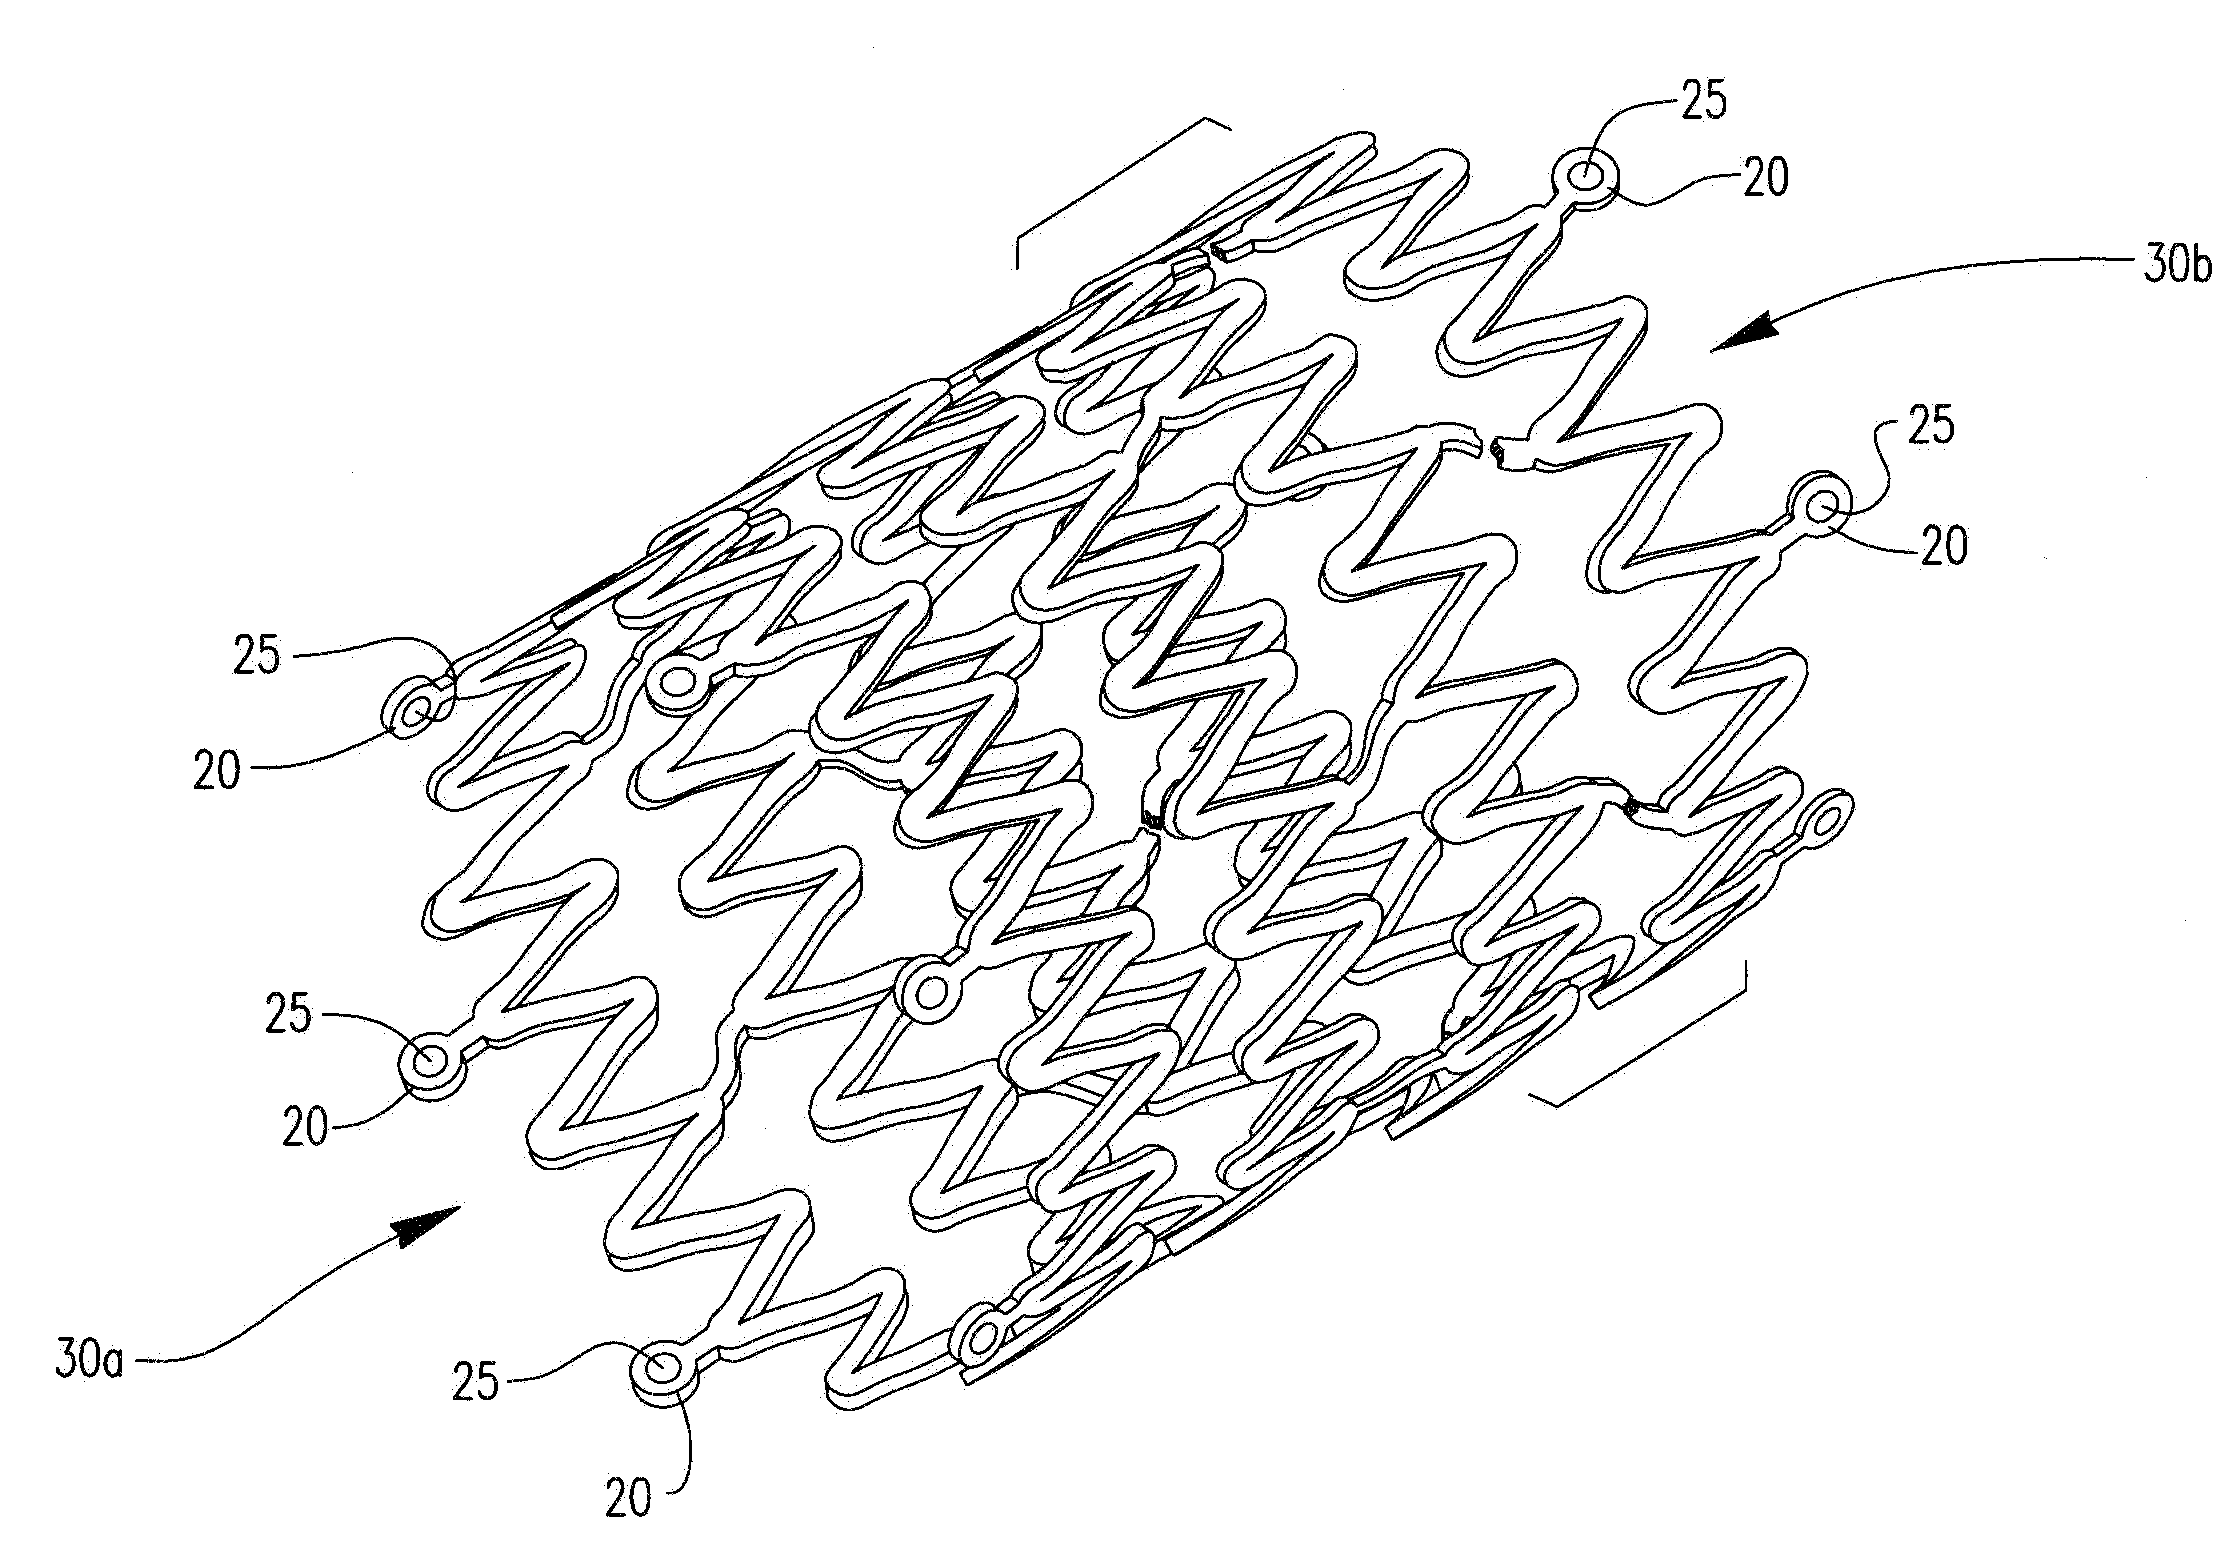 Method of Attaching Radiopaque Markers to Intraluminal Medical Devices, and Devices Formed Using the Same